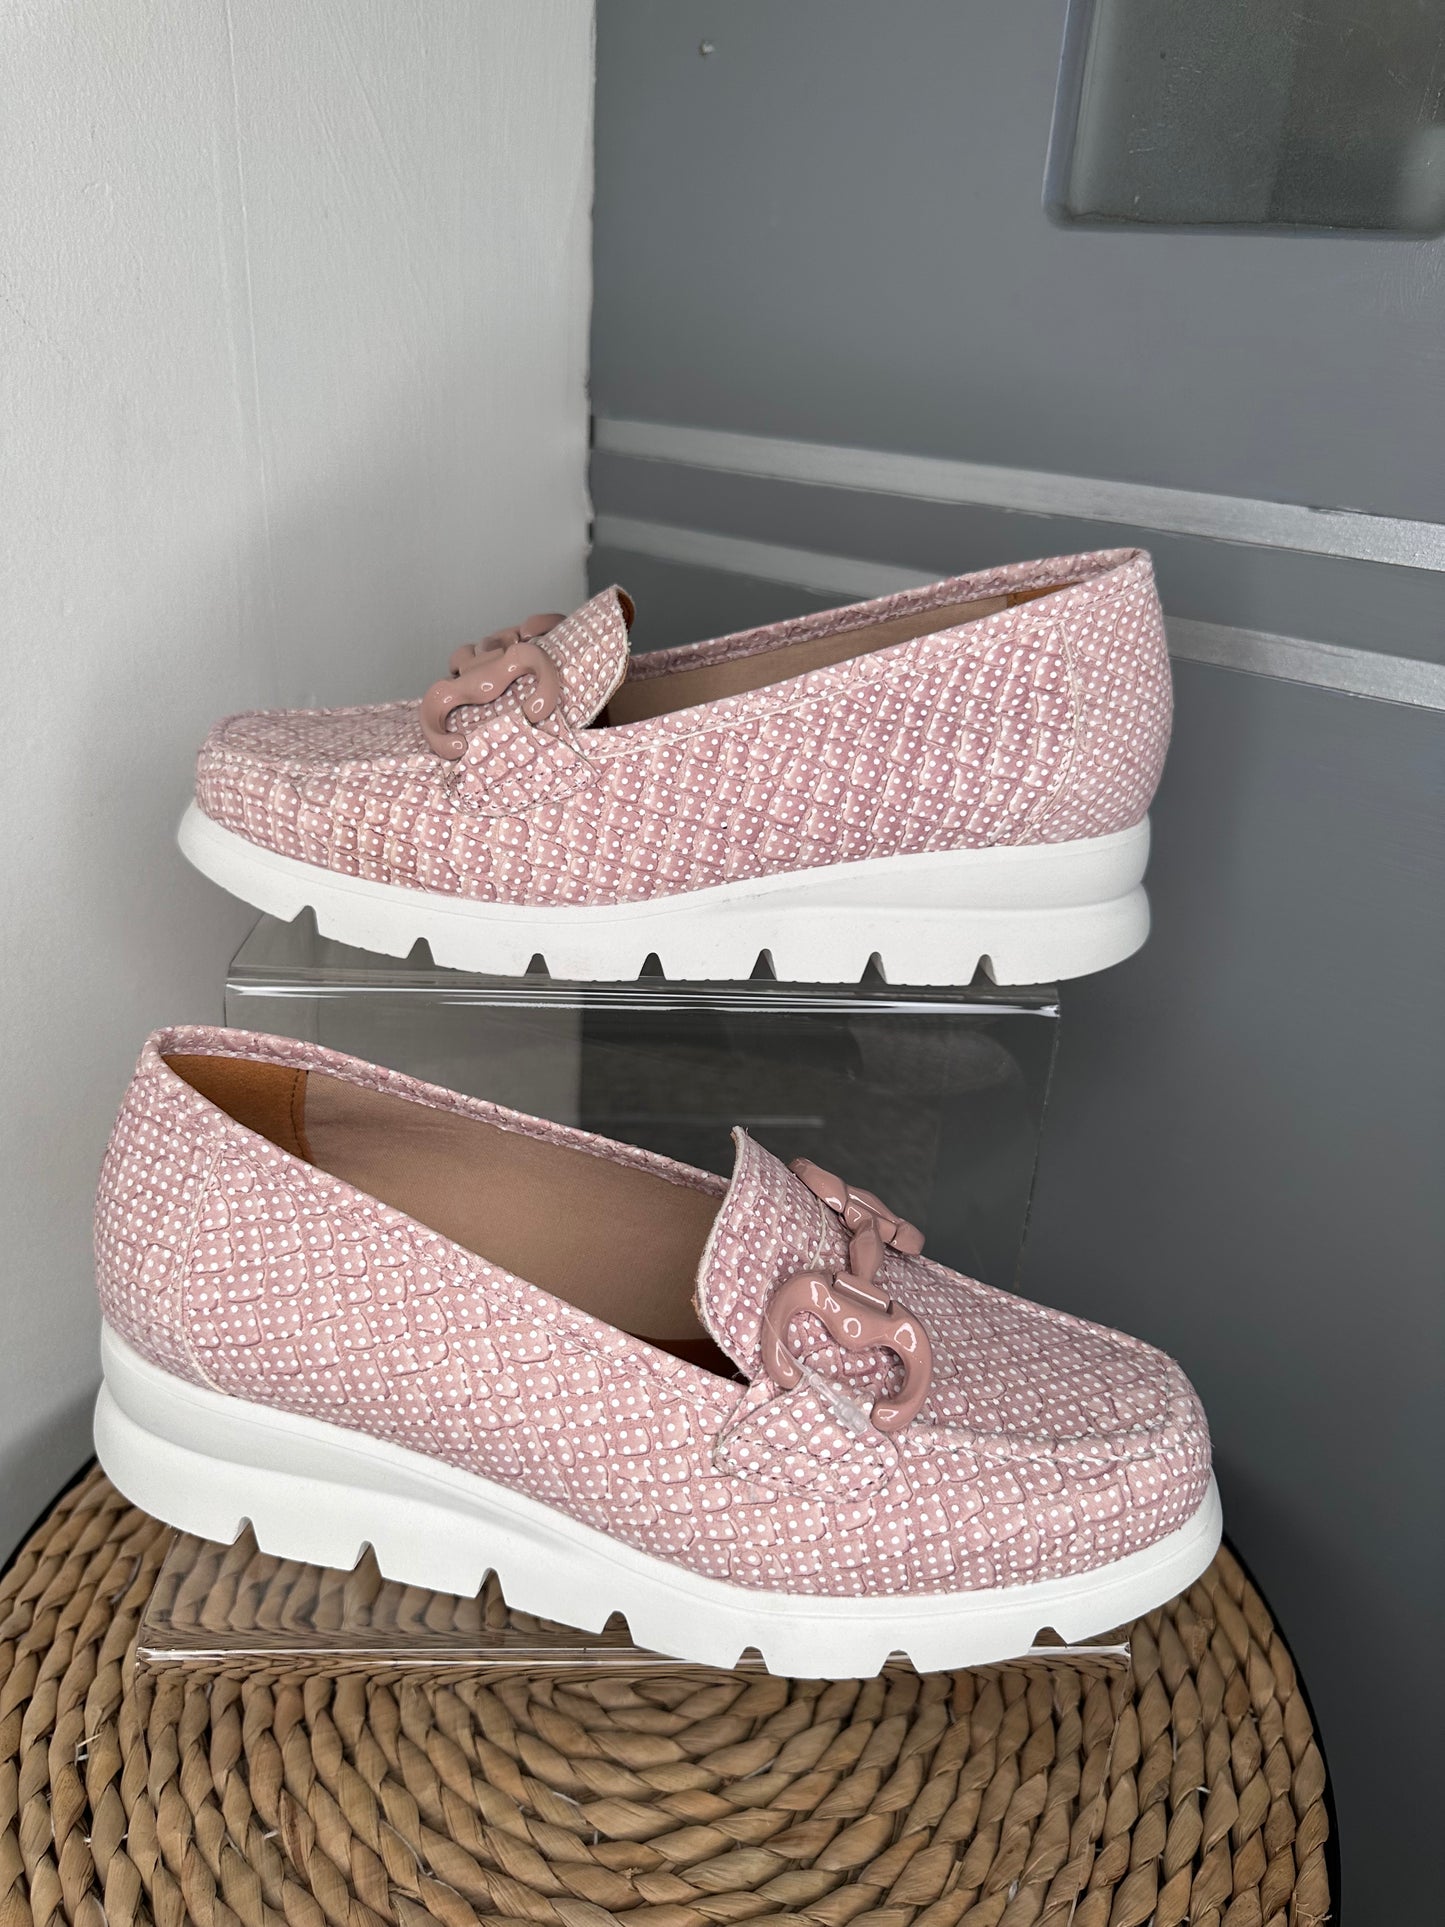 Dchicas (By Viguera) - Soft Pink/ White Print Slip On Sporty Shoe